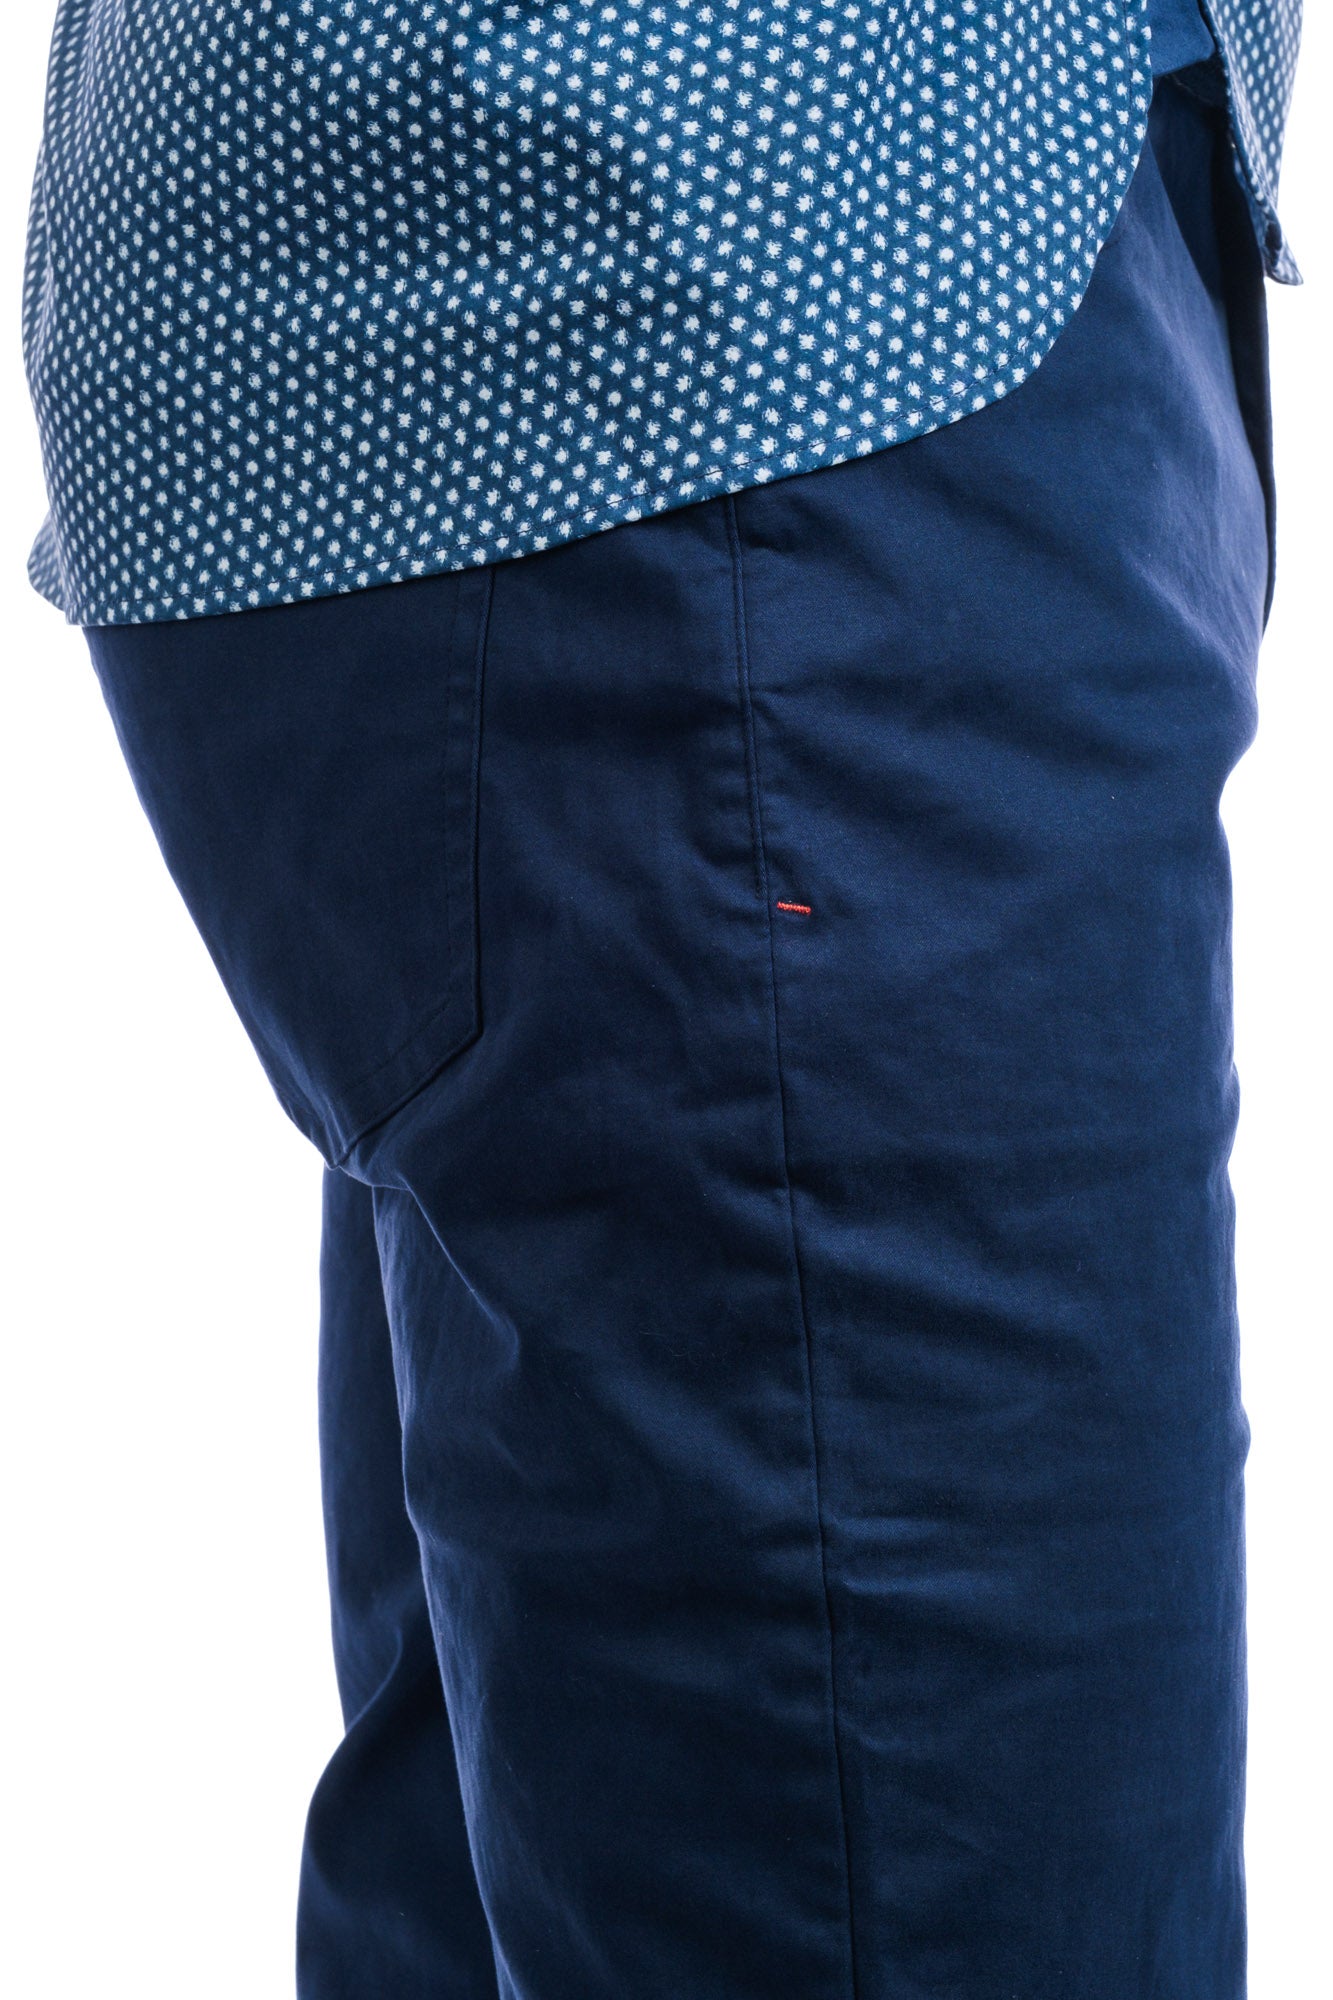 Close up side view of man wearing navy pants.